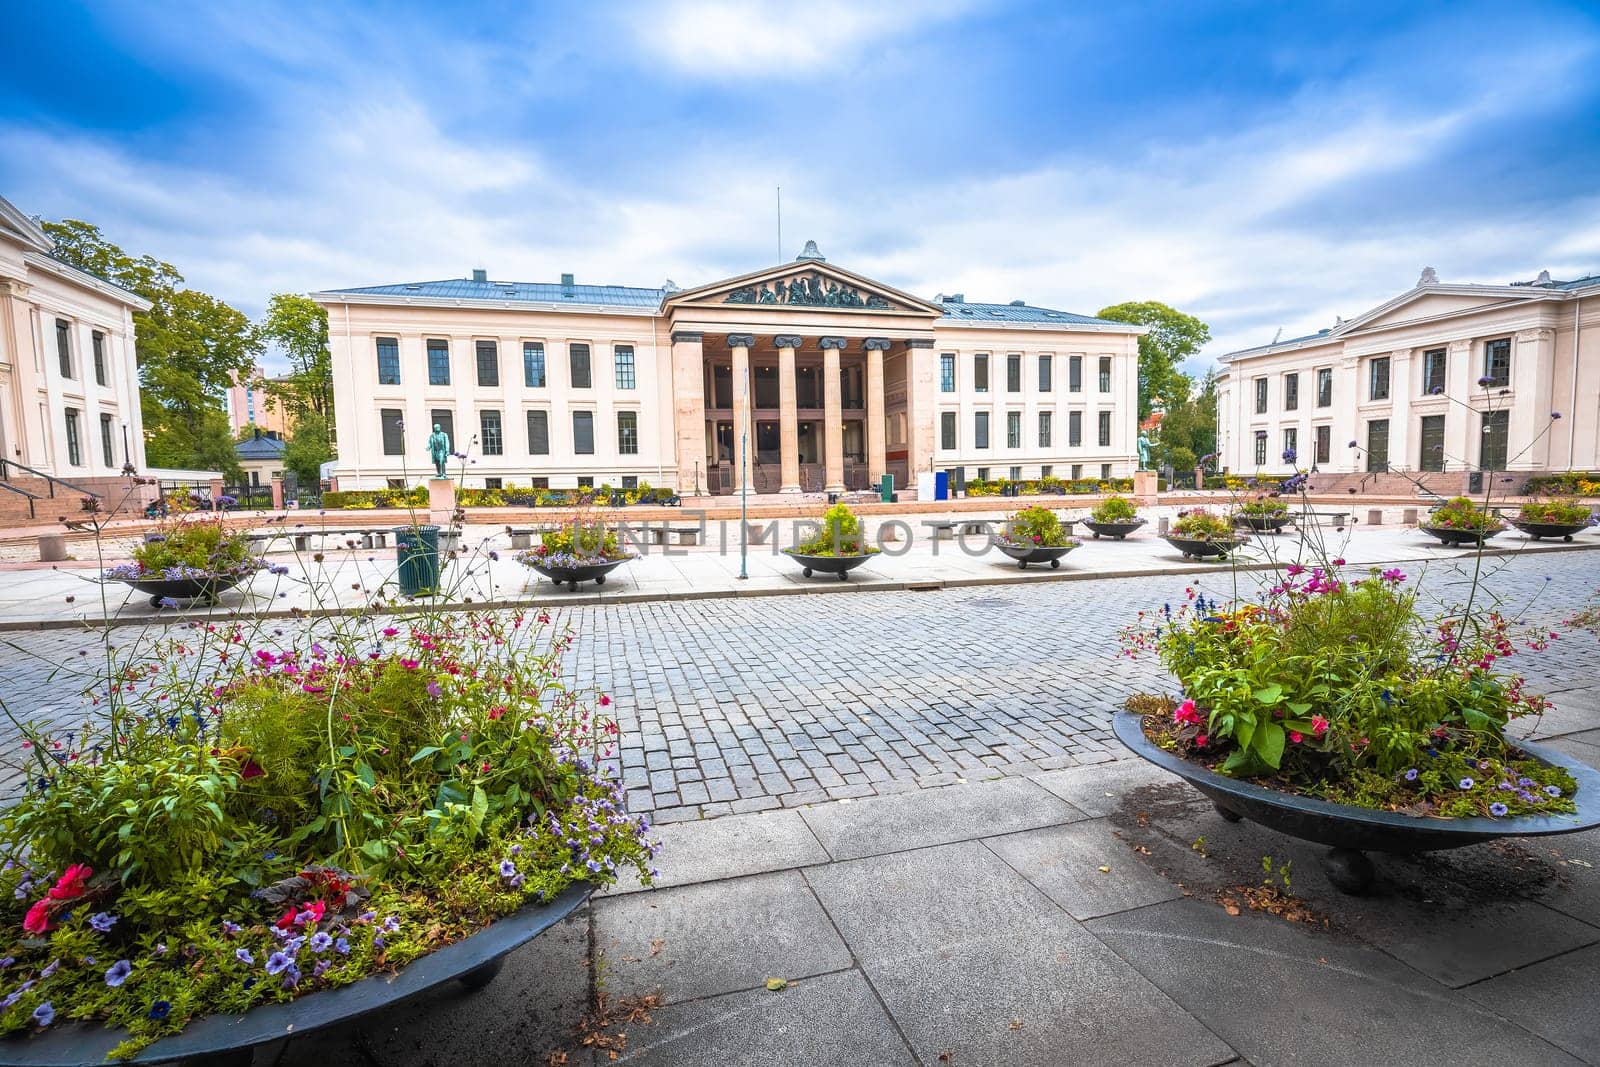 Historic University square in Oslo view by xbrchx